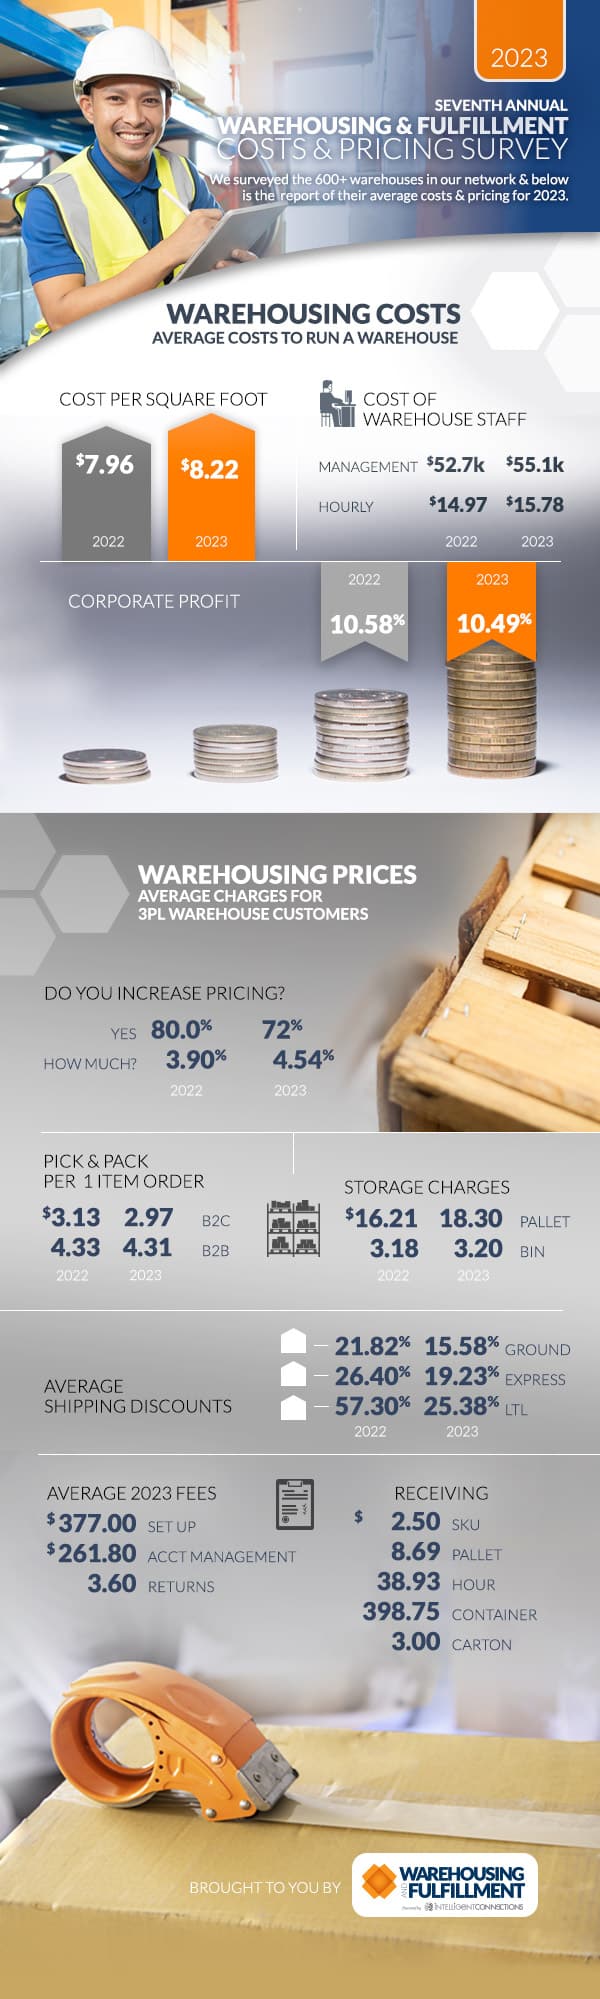 2023 3PL Warehouse Costs